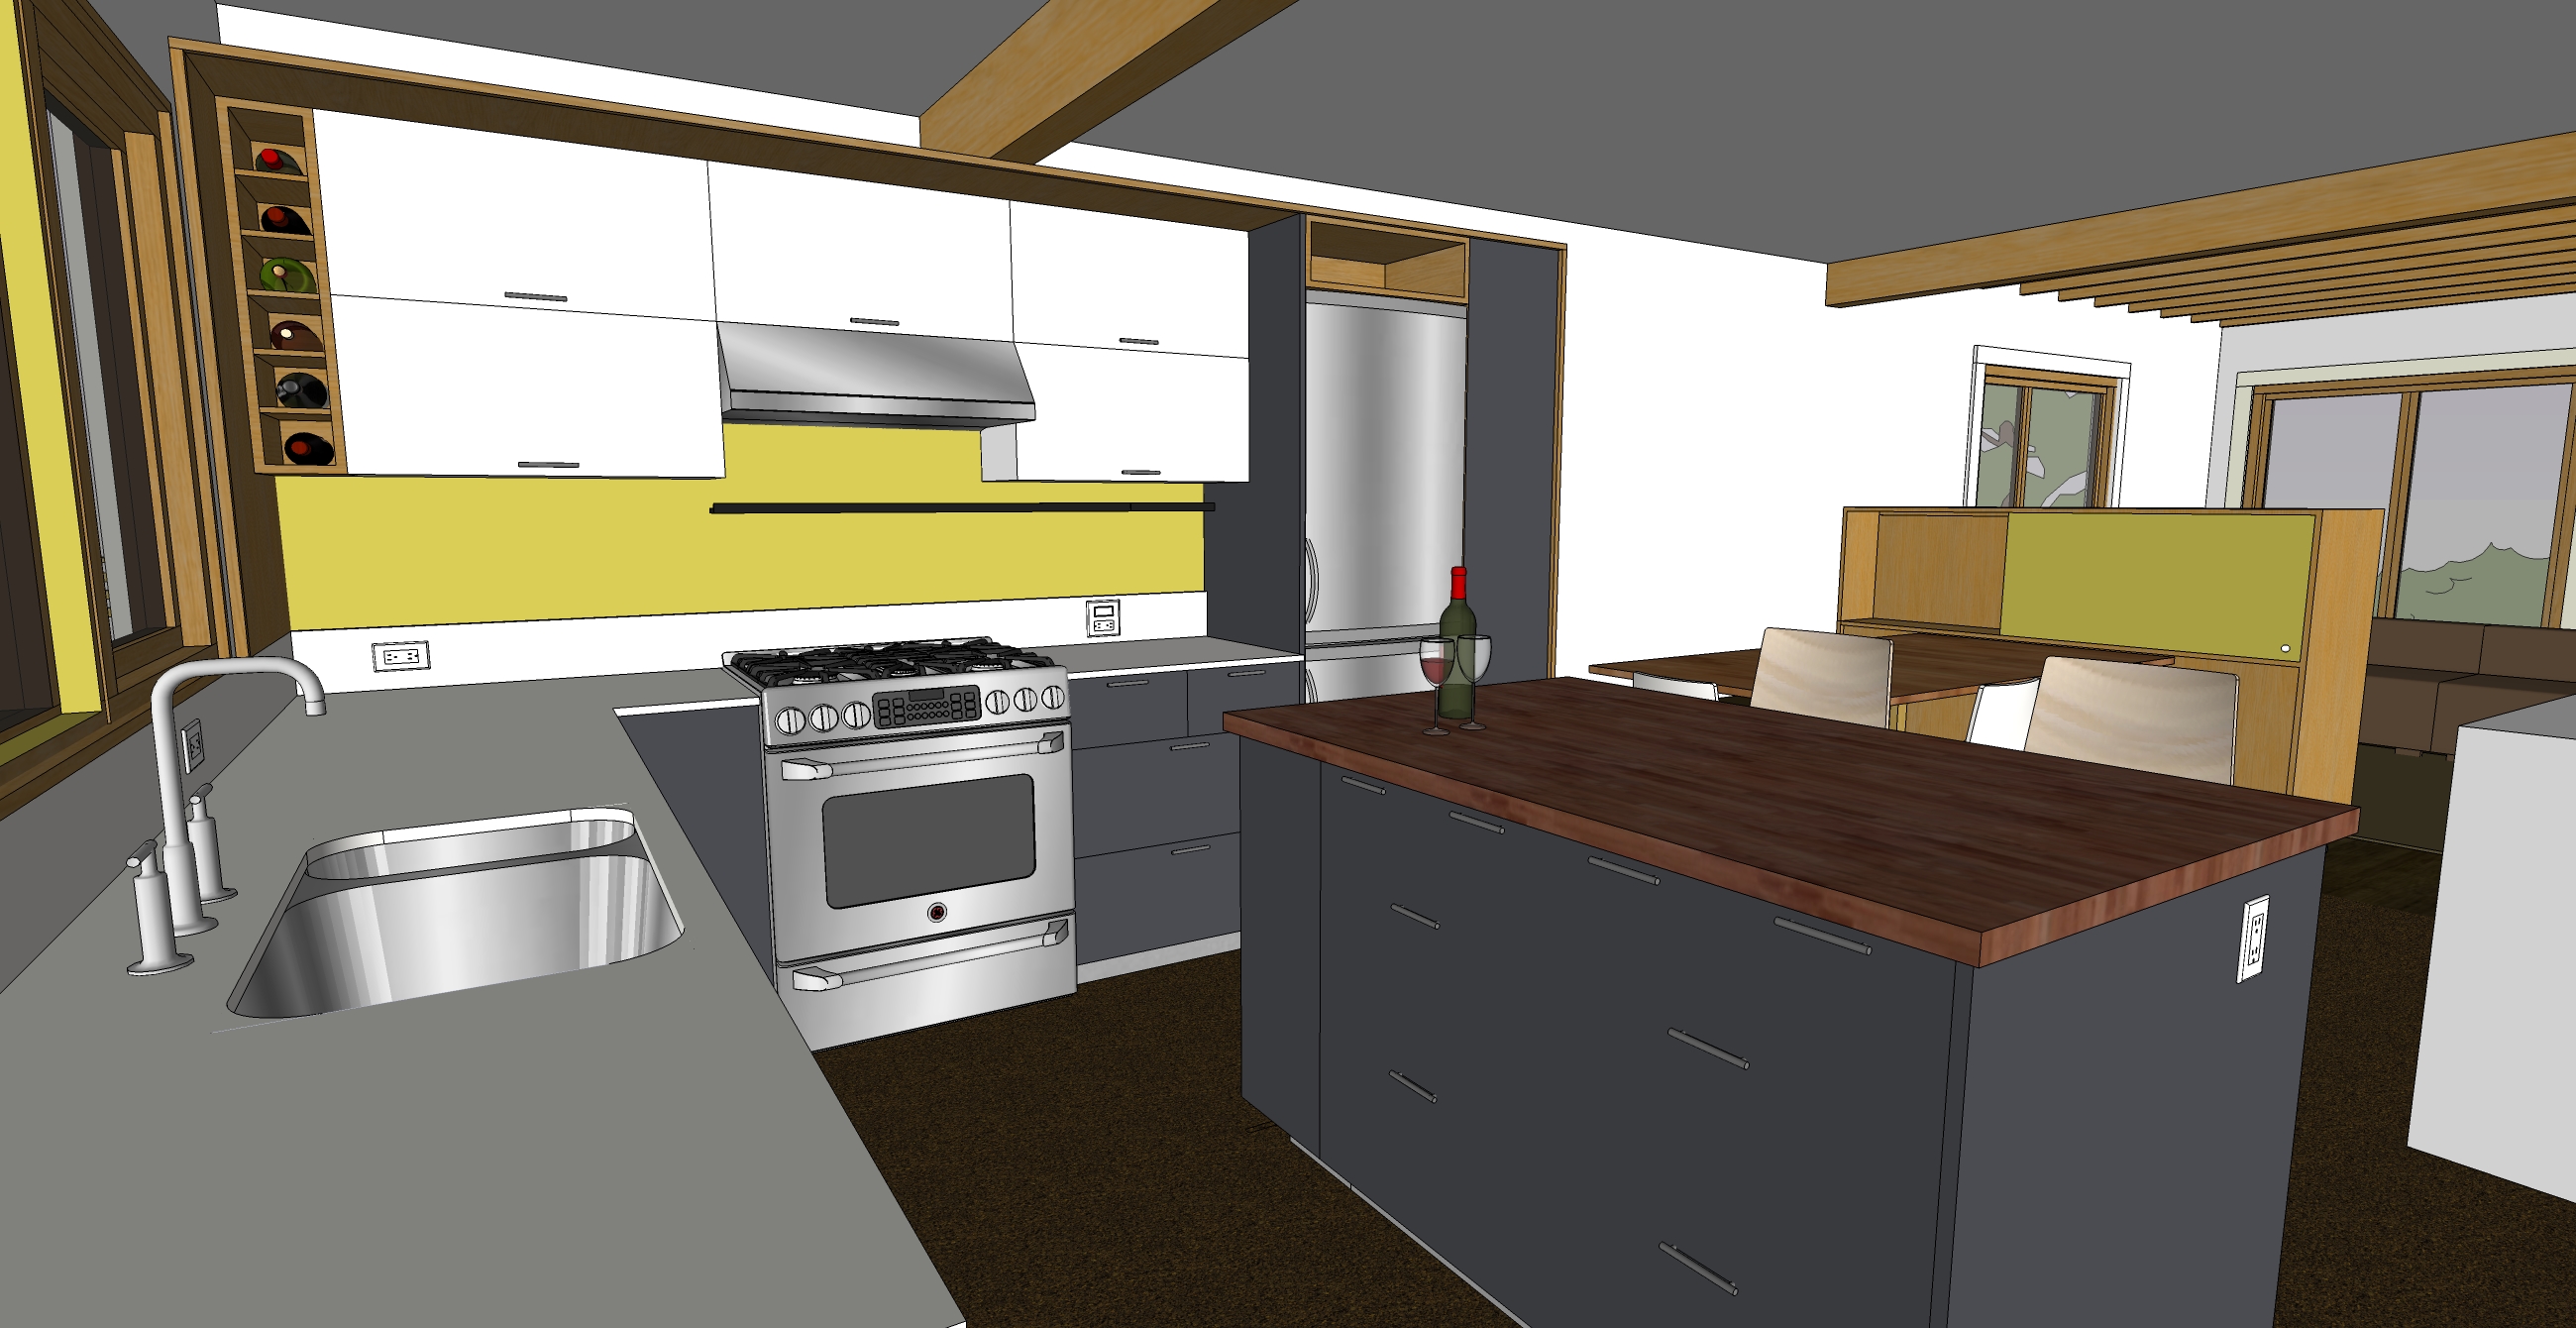 designing kitchen cabinets in sketchup